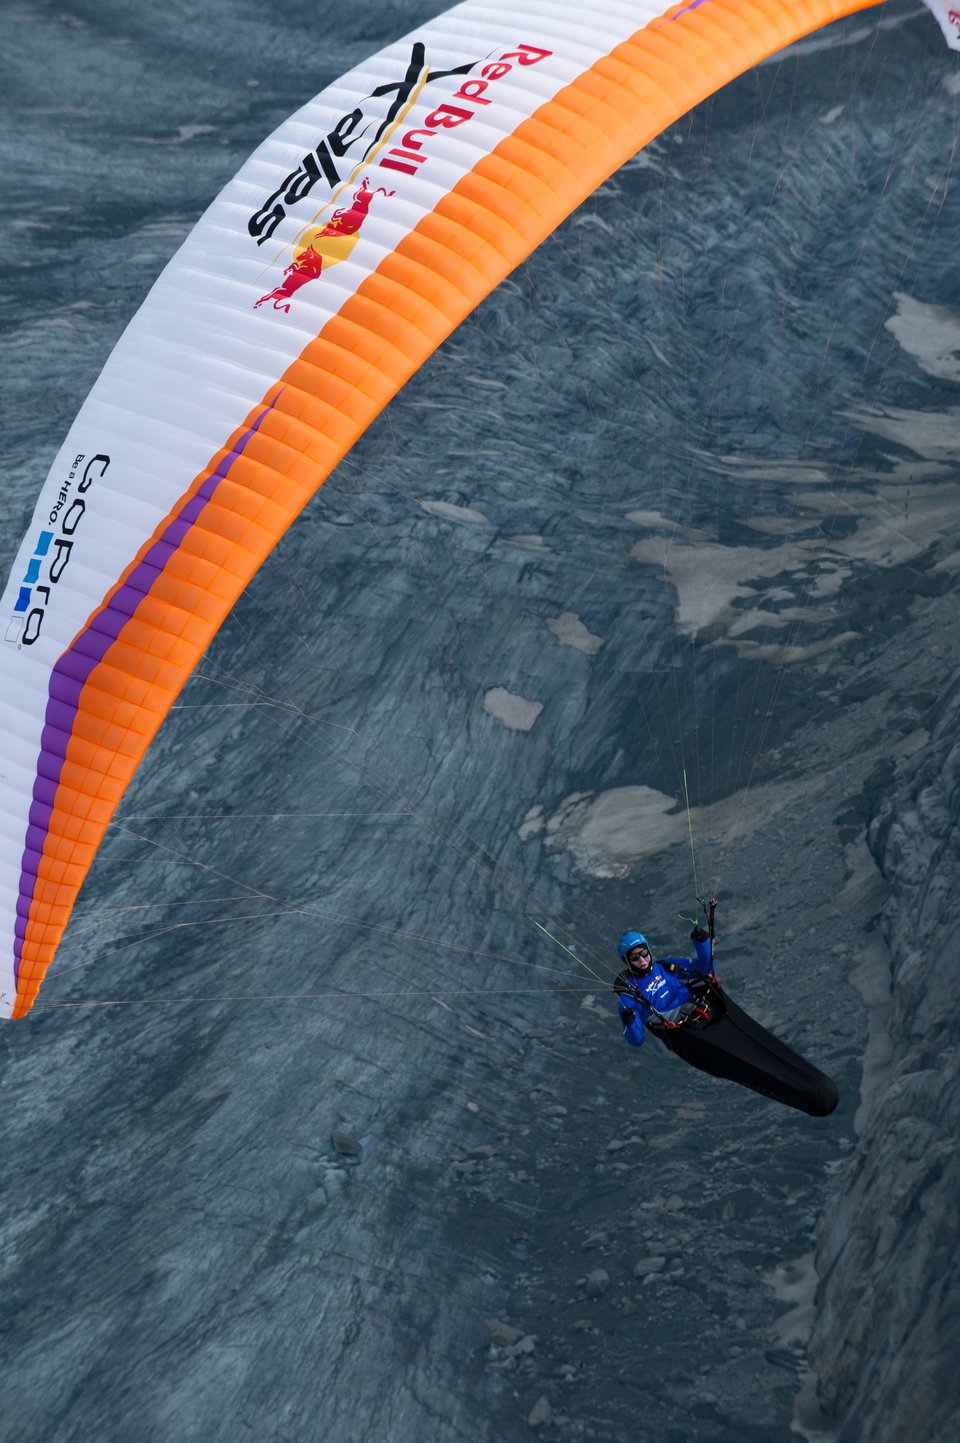 Competitor flies during the Red Bull X-Alps 2013 at Mont Blanc in Chamonix, France on July 14th, 2013  Image © Felix Woelk/Red Bull Content Pool